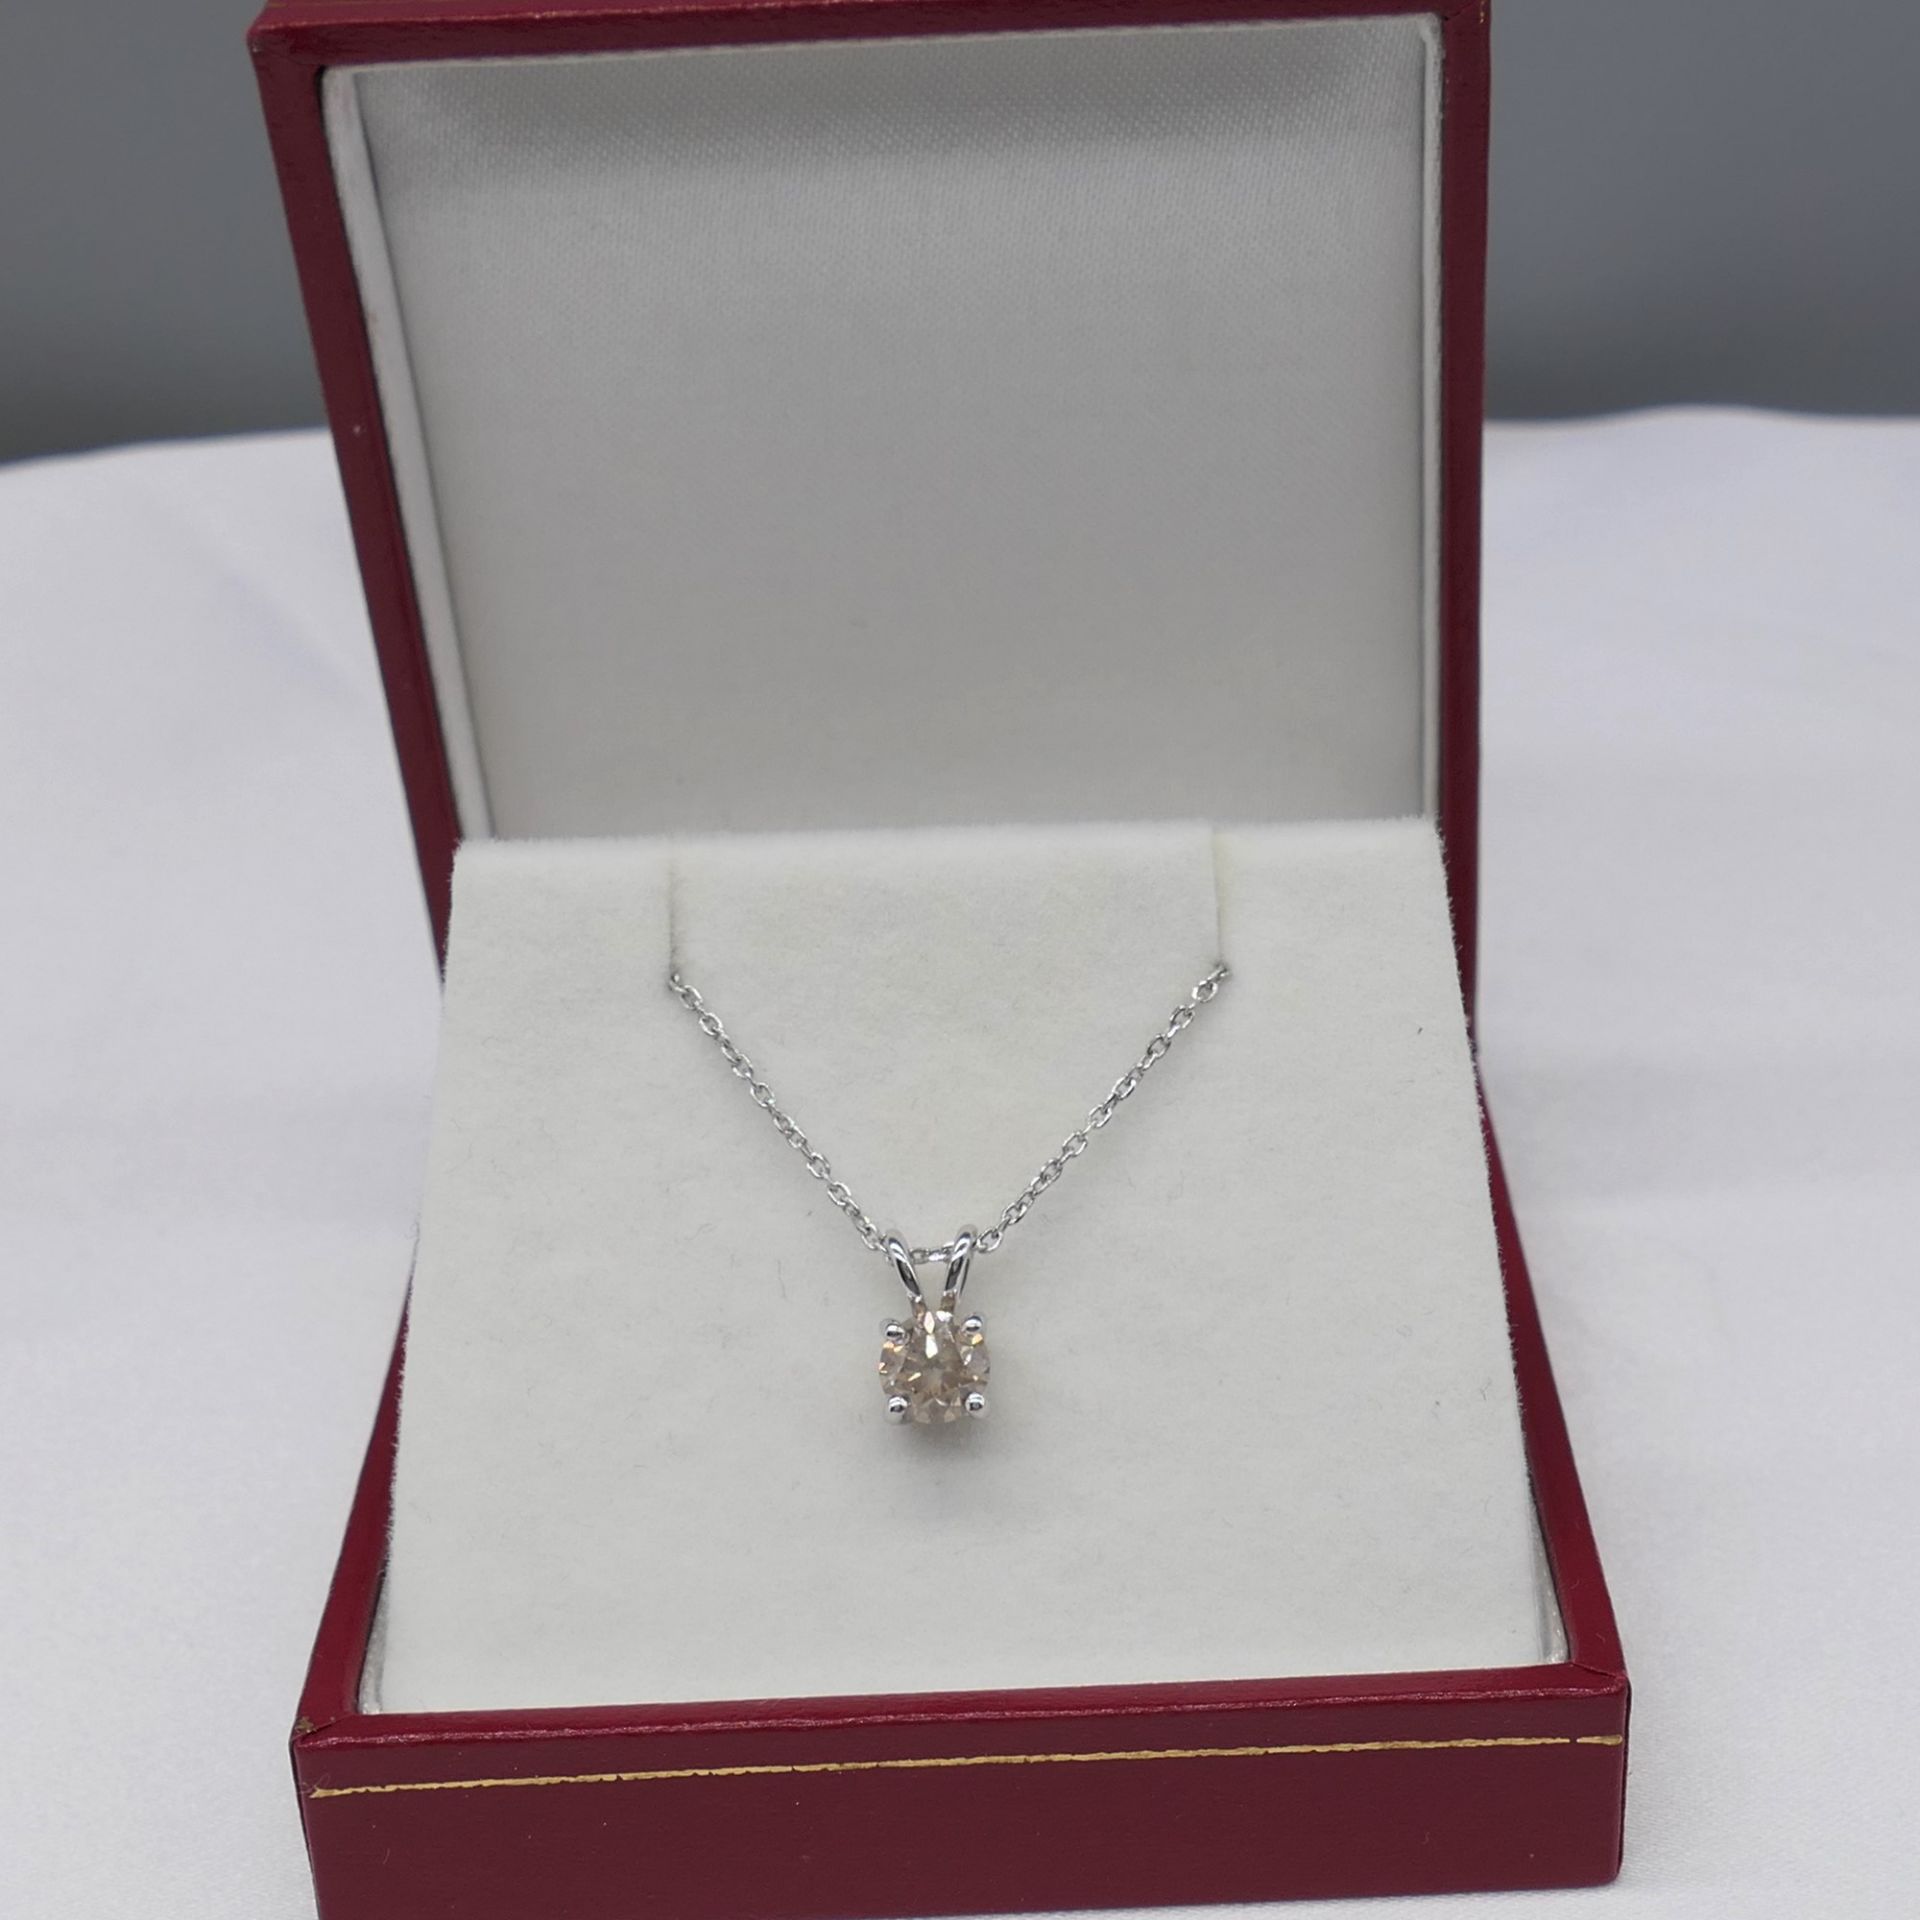 18ct White Gold 0.74 Carat Diamond Solitaire Pendant With Chain, Boxed - Image 3 of 7